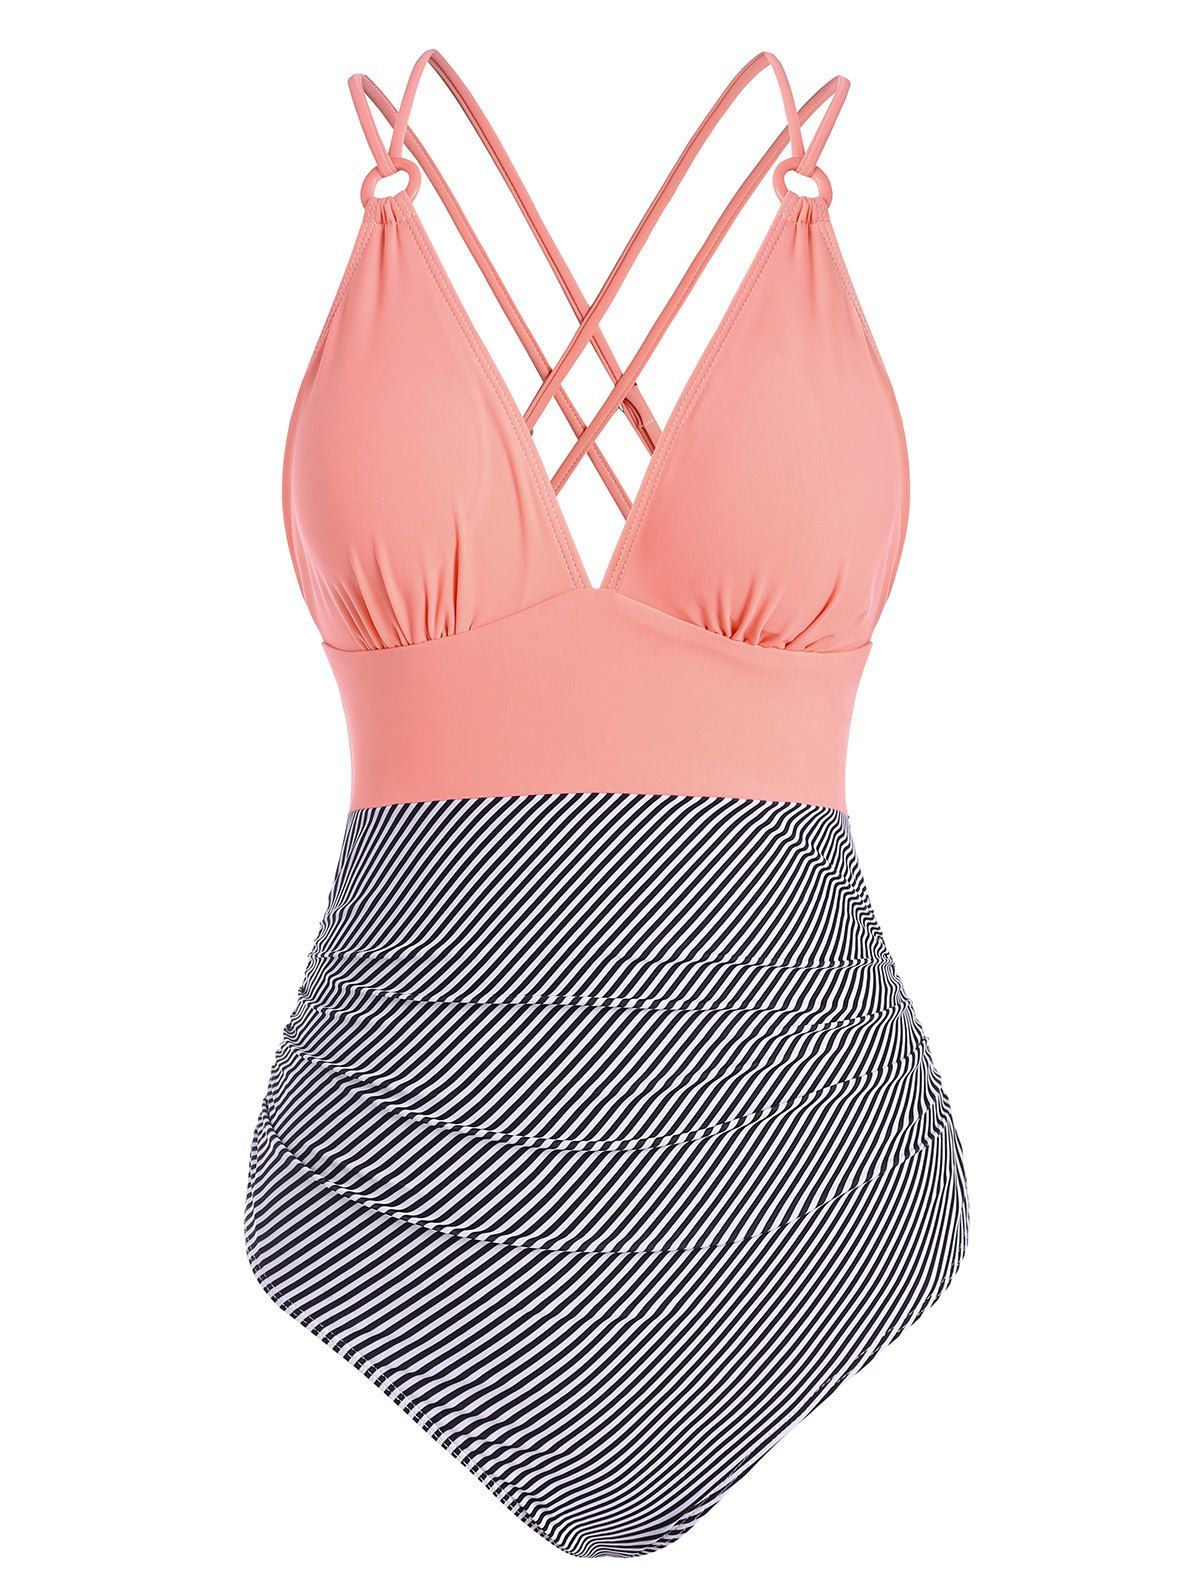 Striped Ruched Crisscross Back One-piece Swimsuit - LIGHT PINK L